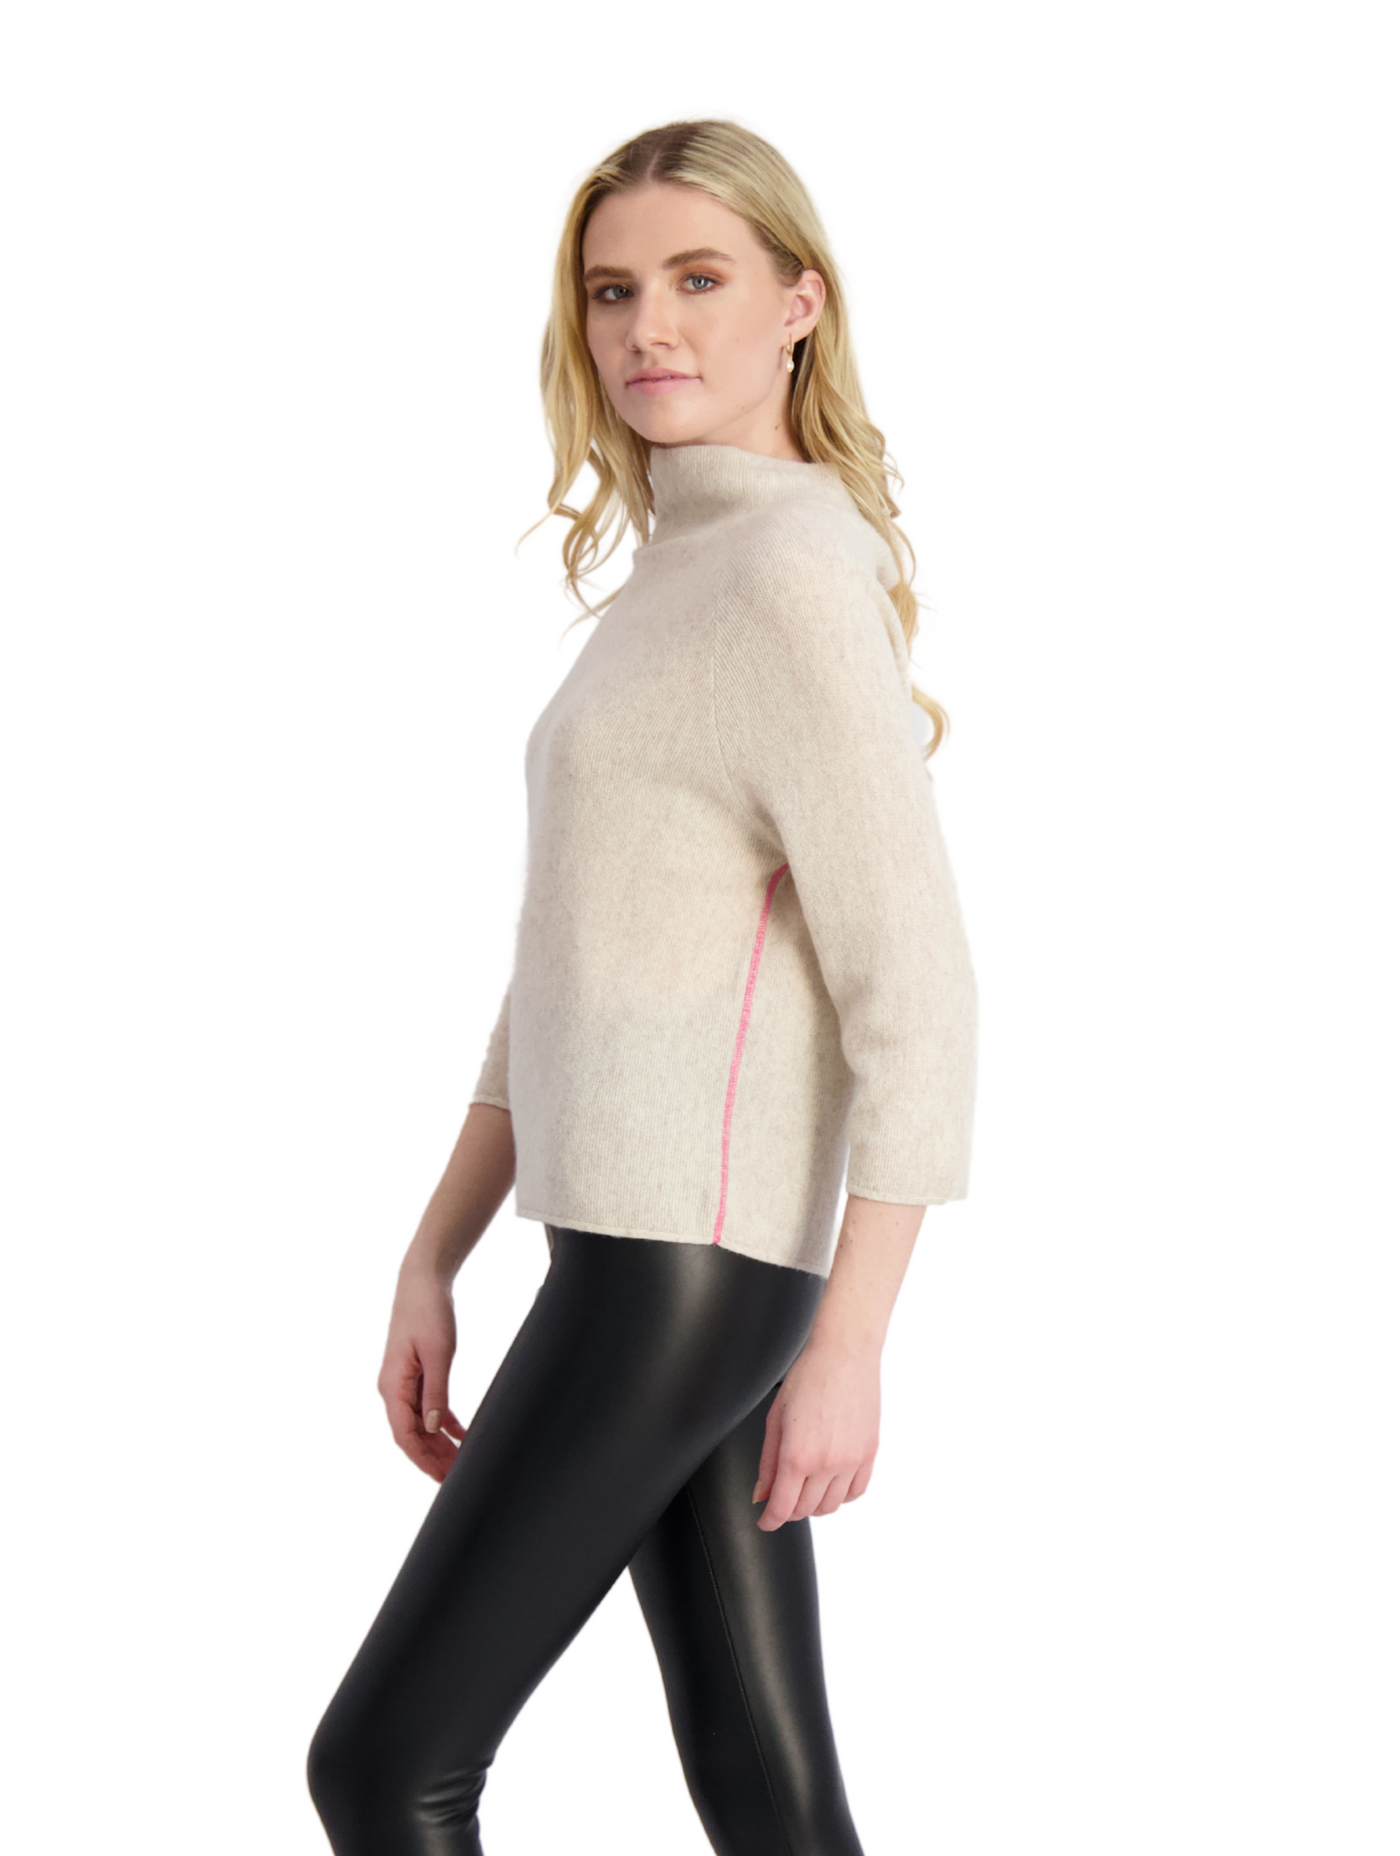 M&s Ladies Leggings Sale | International Society of Precision Agriculture